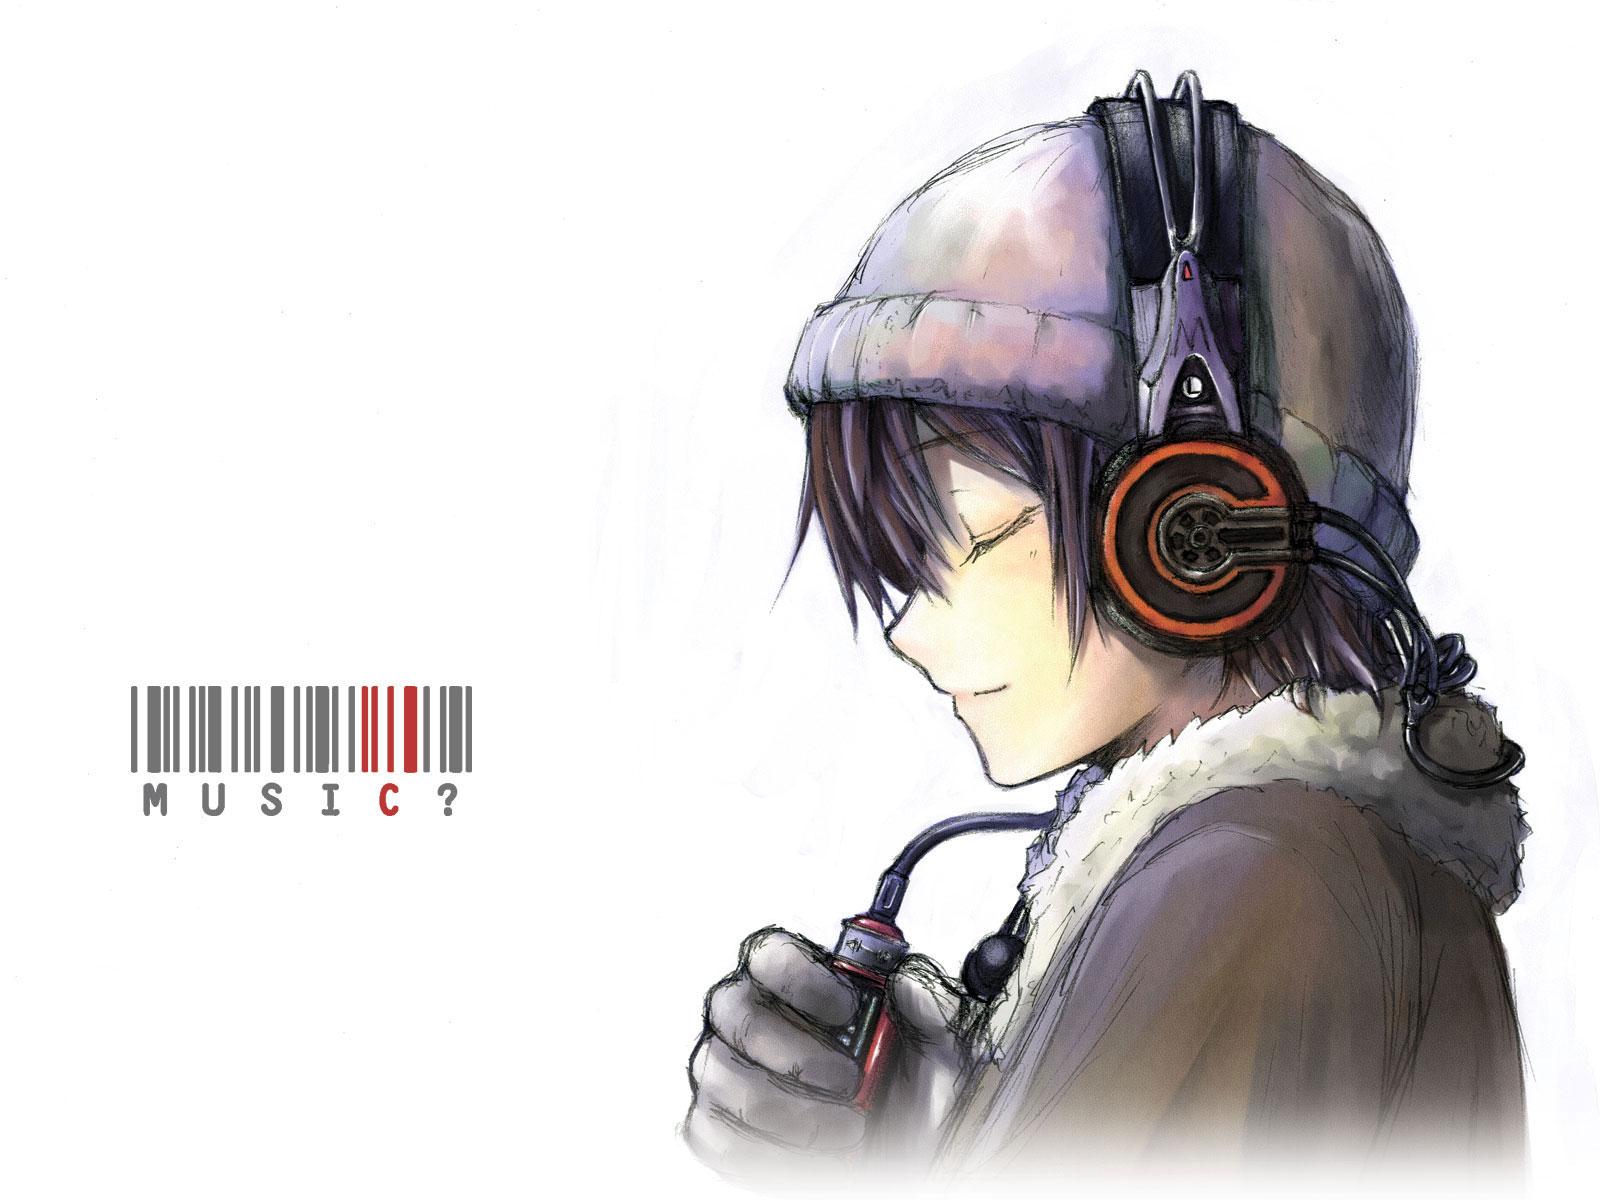 500 Anime Music 2048x1152 Wallpapers  Background Beautiful Best Available  For Download Anime Music 2048x1152 Images Free On Zicxacomphotos  Zicxa  Photos